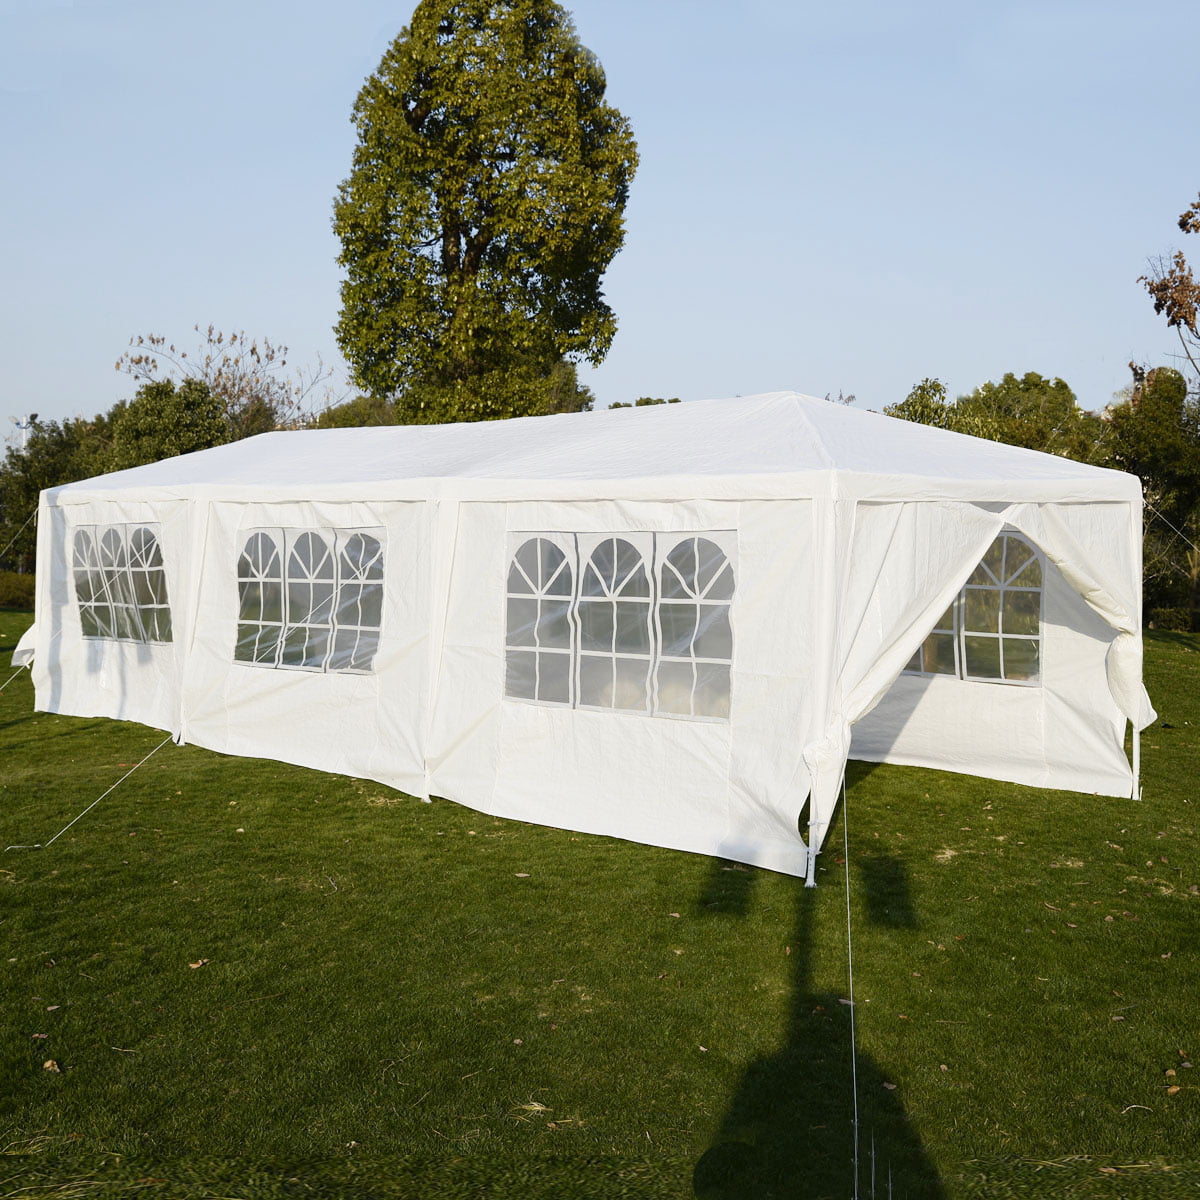 Details about   10'x30' Party Tent Canopy Pavilion Heavy Duty Outdoor BBQ Wedding Gazebo Events 